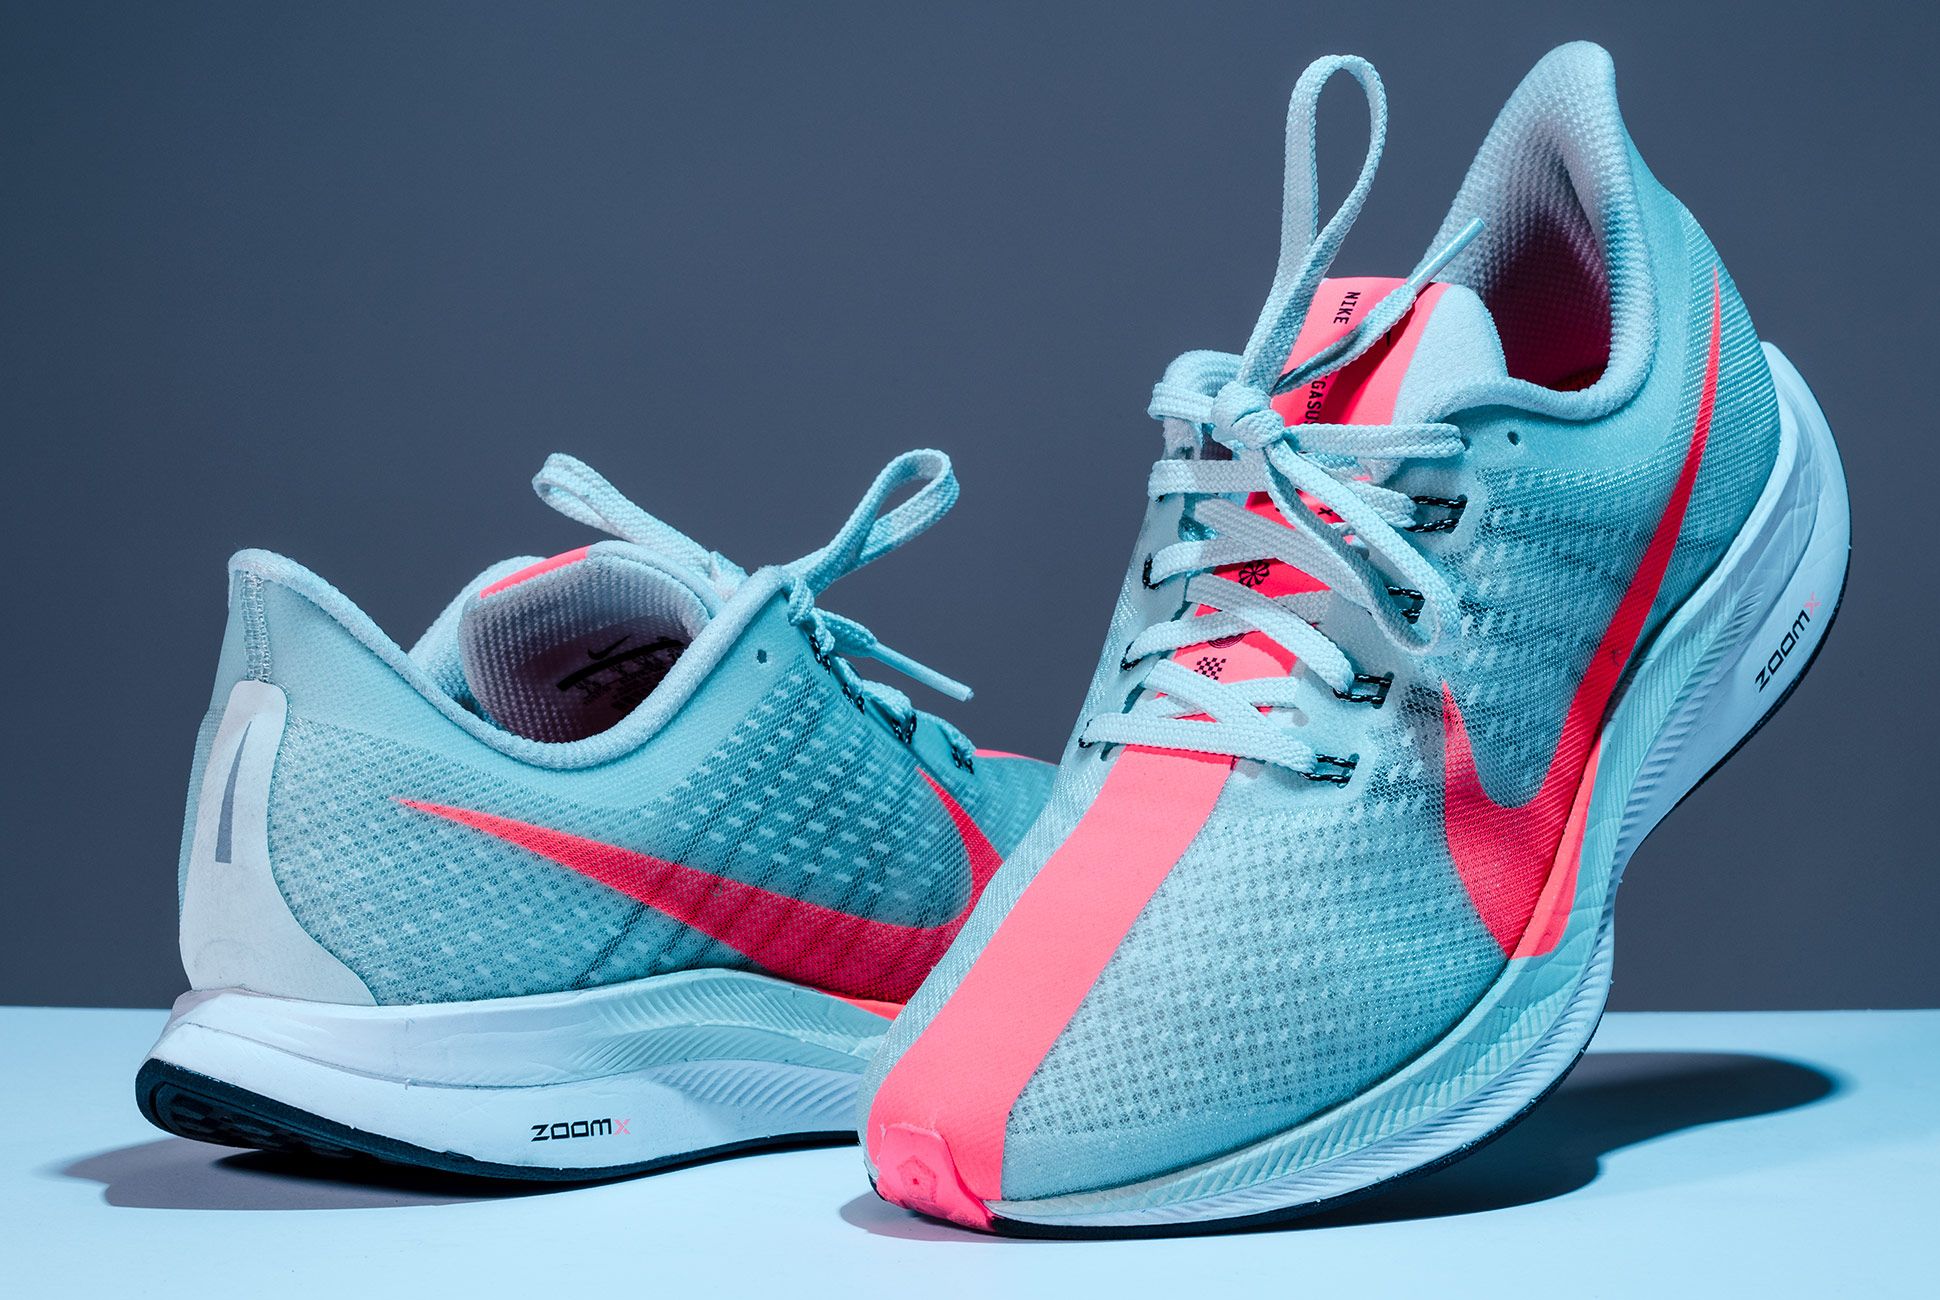 Nike Pegasus Turbo Review: An Everyday Trainer That